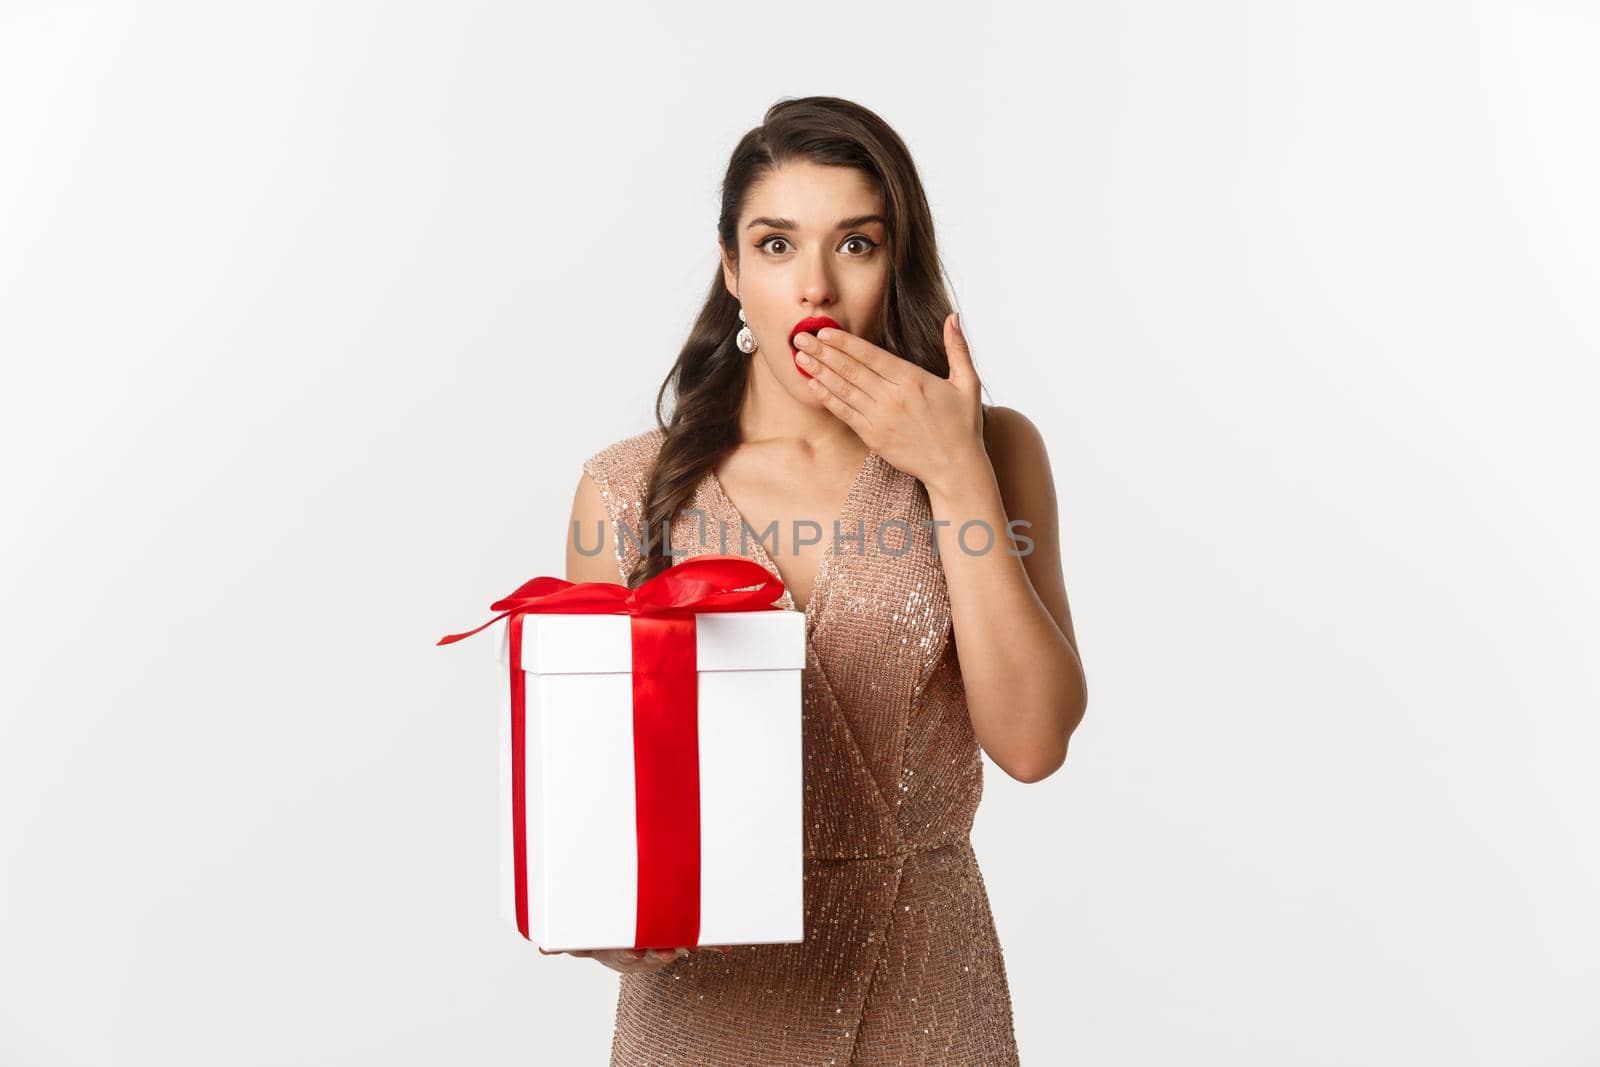 Merry Christmas. Beautiful woman looking surprised and holding gift, receiving new year presents, standing in luxury dress, standing over white background.